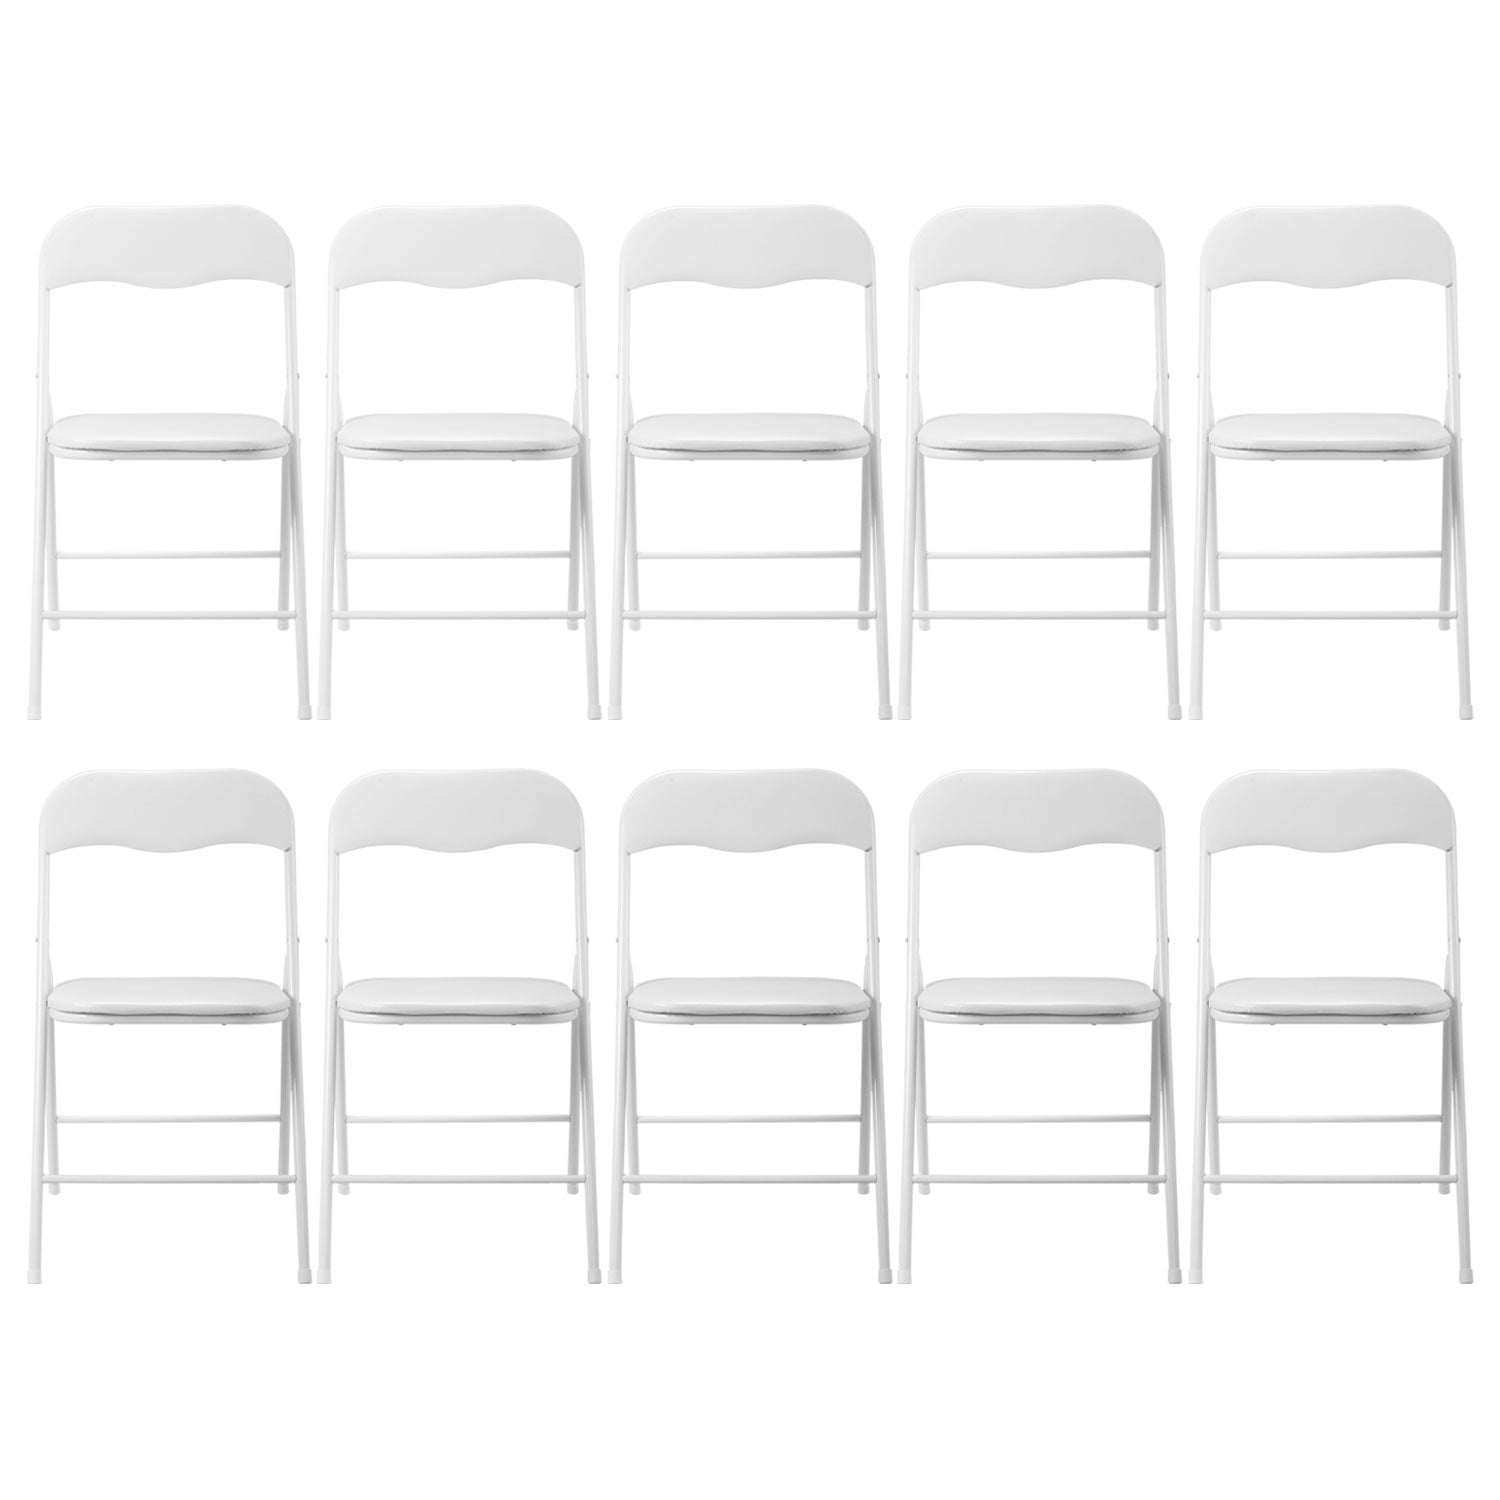 Commercial Wedding Quality Stackable Plastic Folding Chairs White 10 PACK 